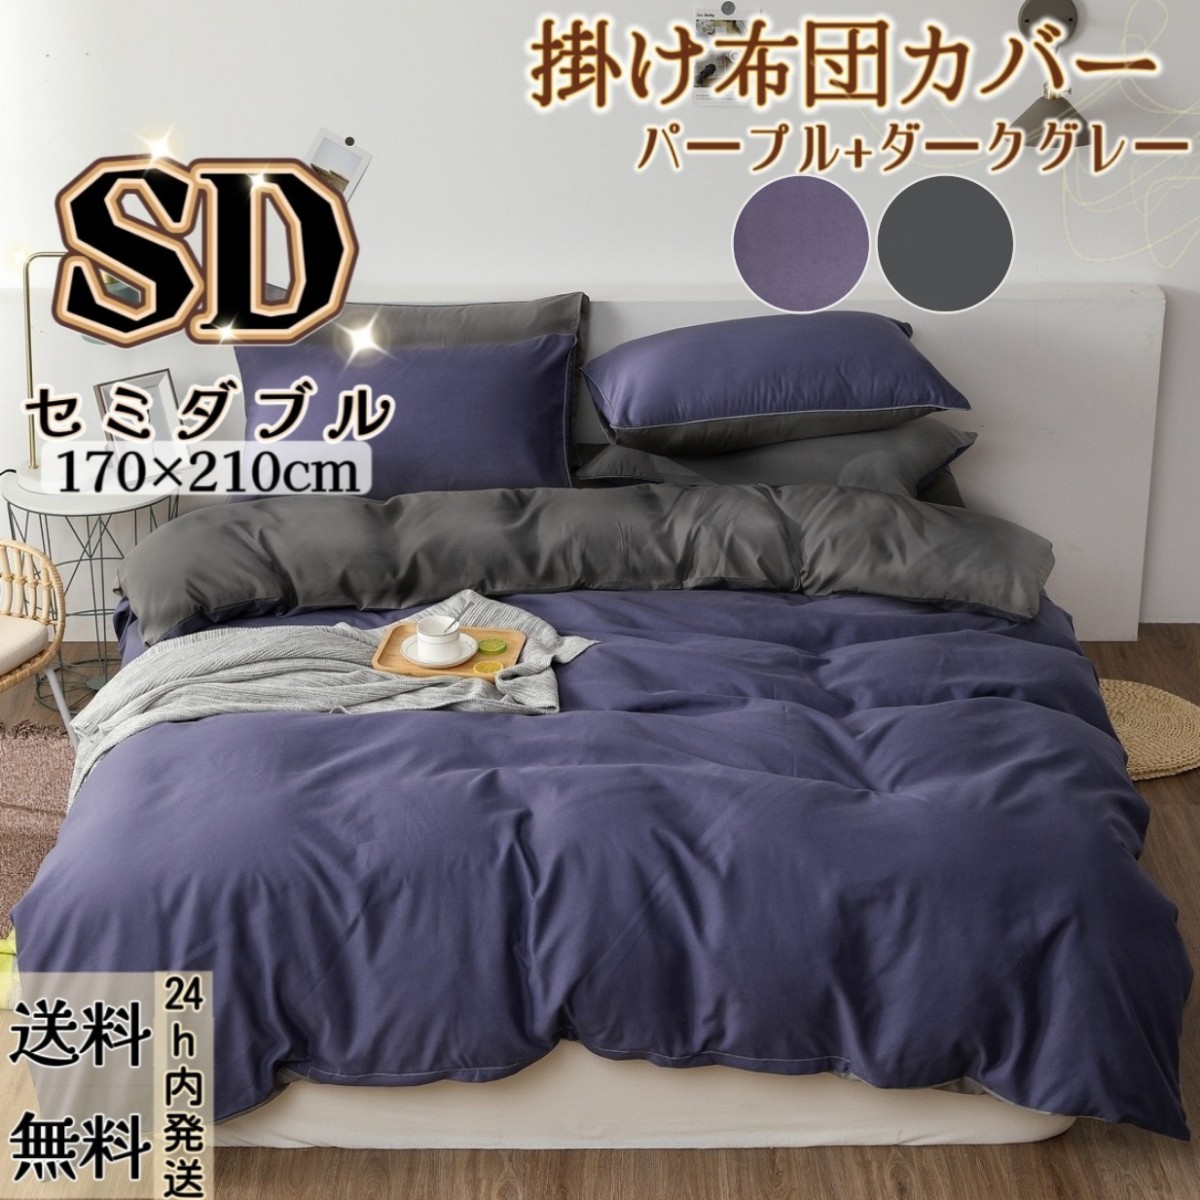  futon cover .. futon cover feel of is good bedding cover winter summer combined use soft ( semi-double *170*210CM* reversible * purple + dark gray )